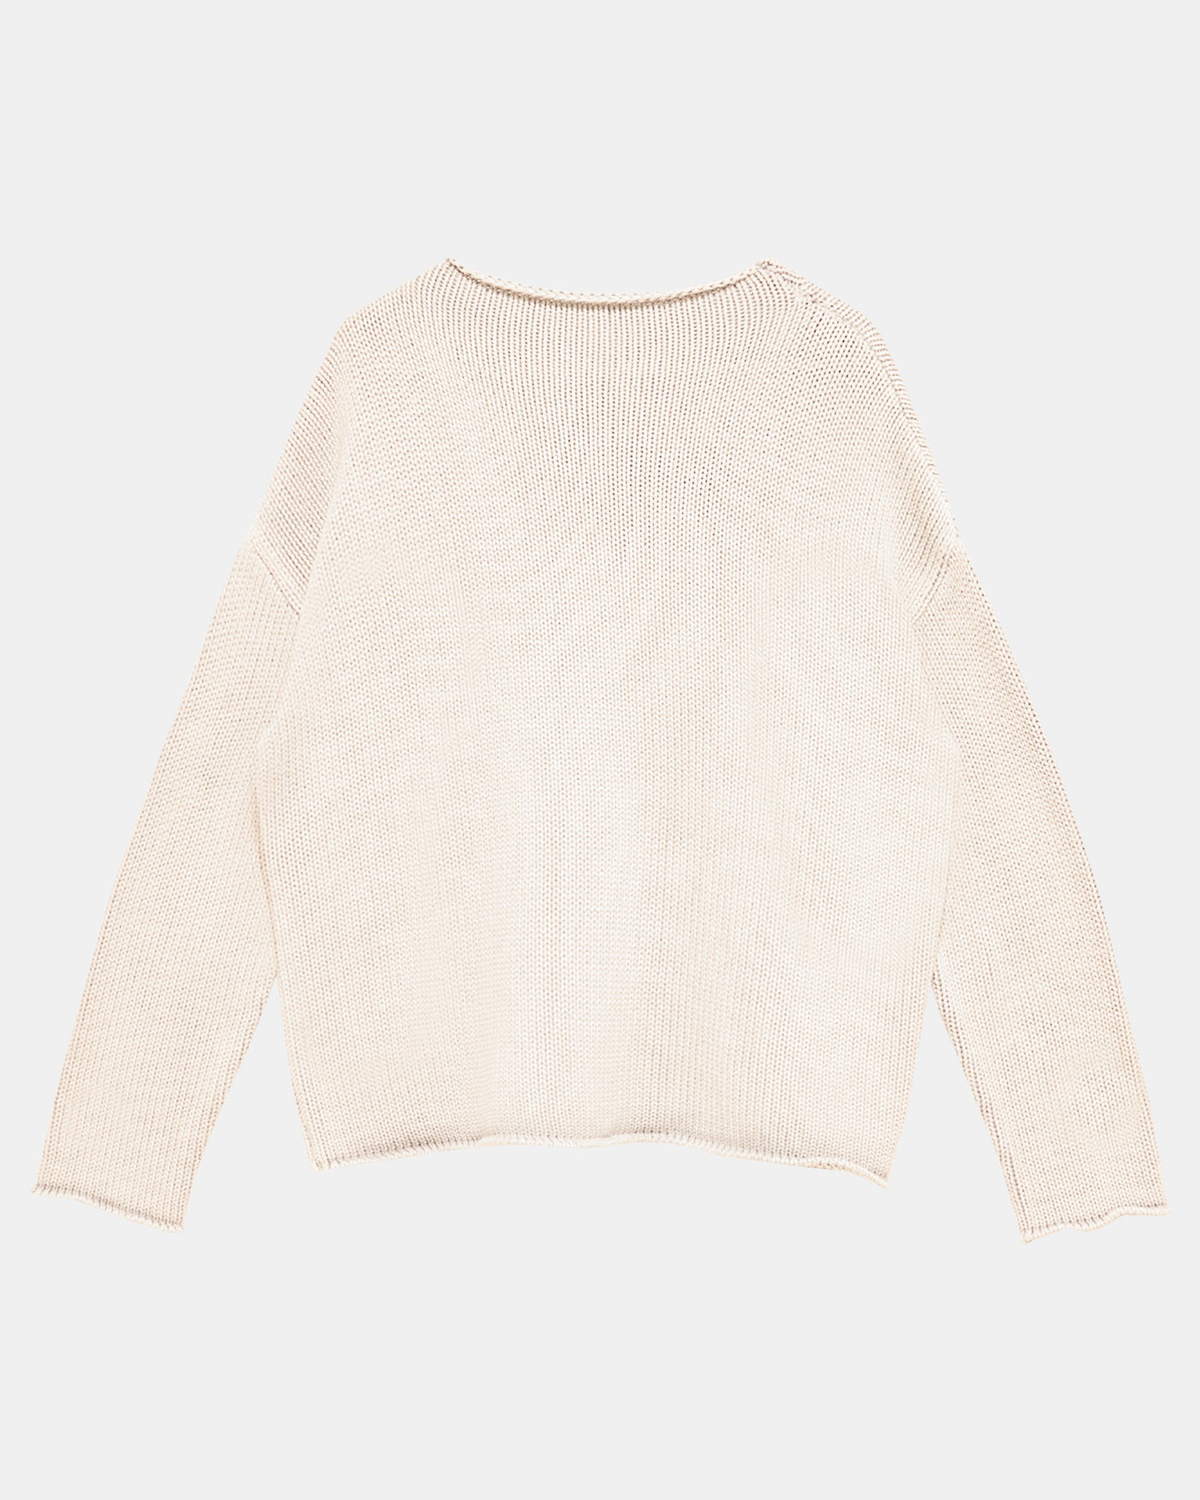 Lamis Boatneck Sweater in Off White